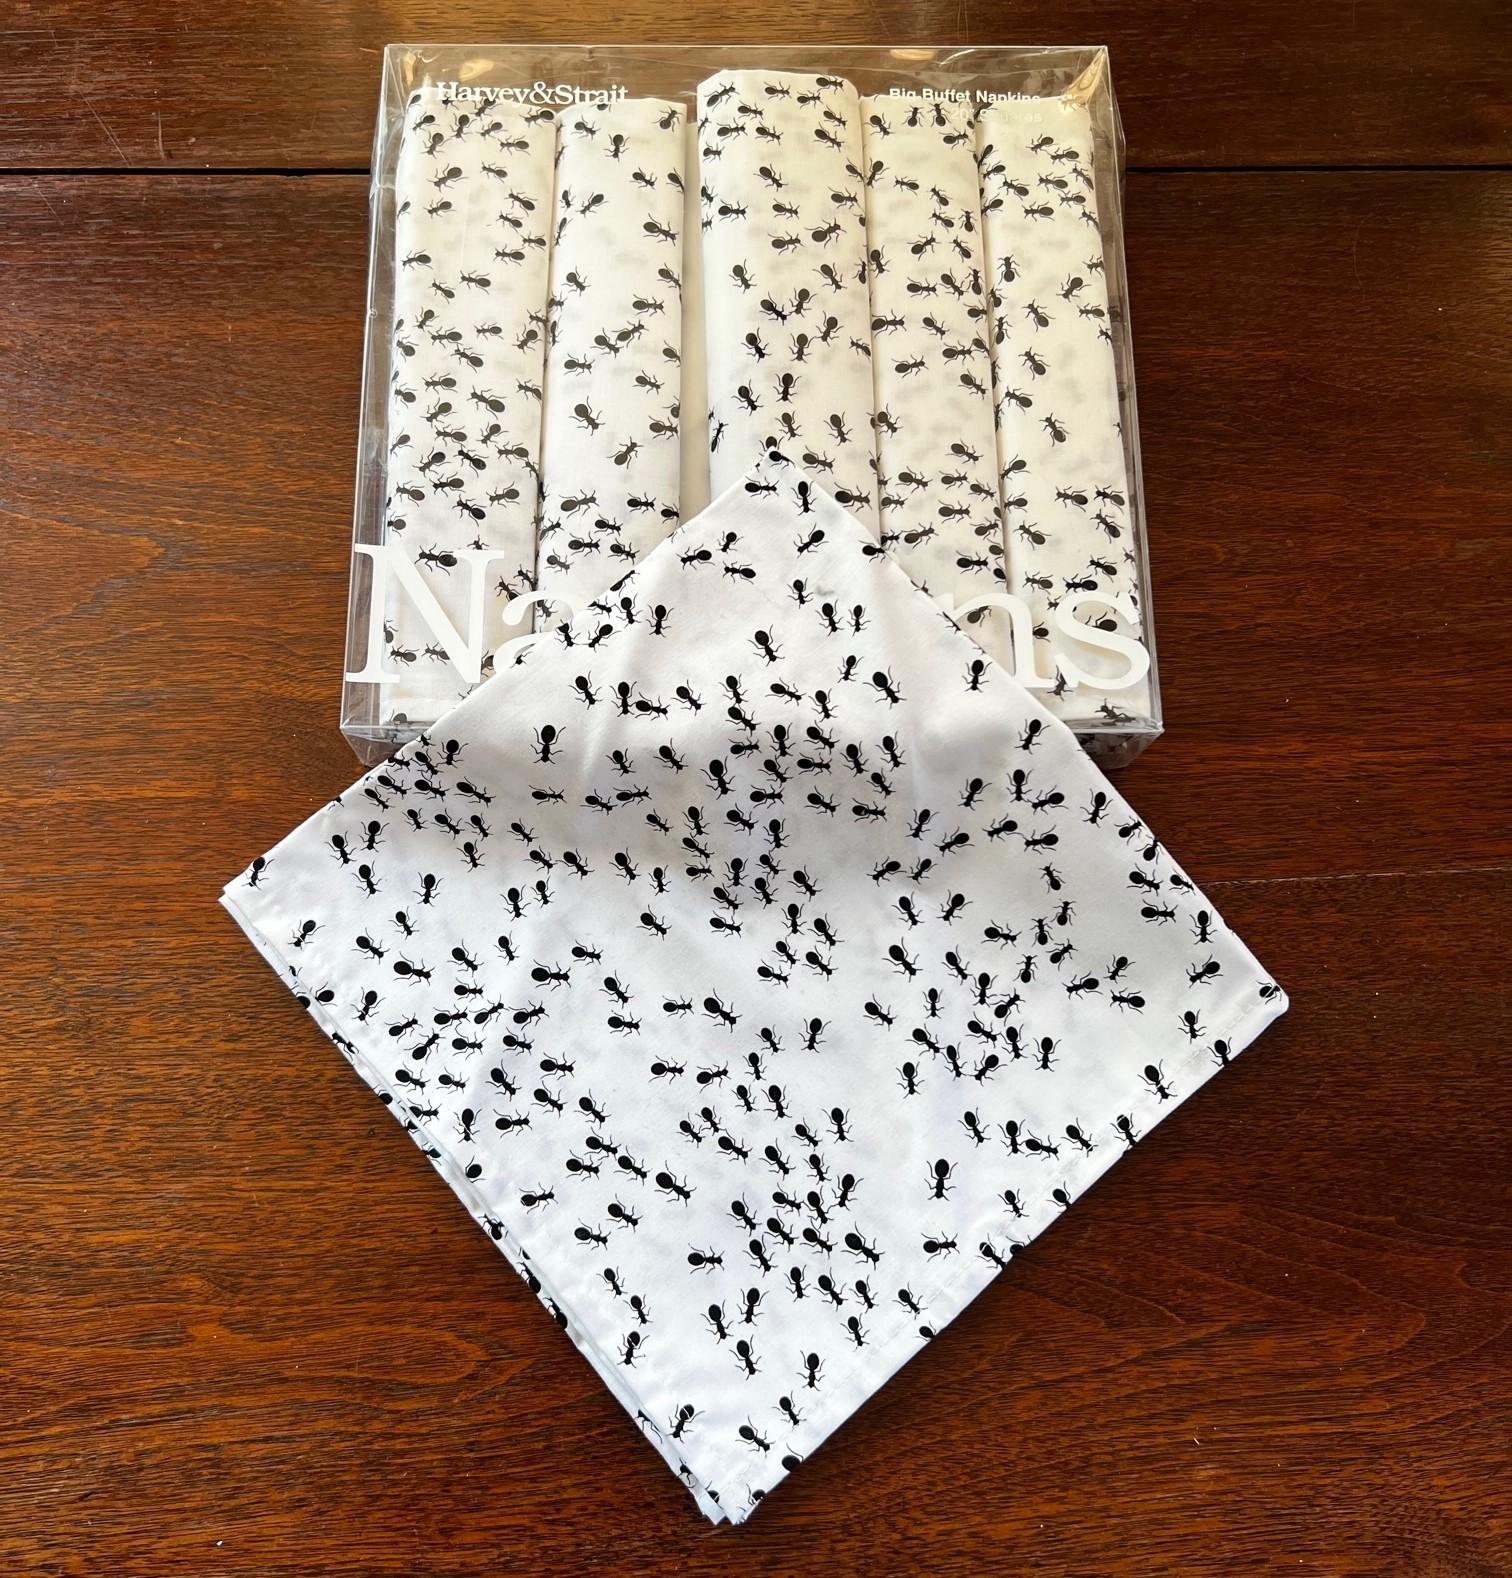 Contemporary Set of 6 White Cotton Harvey & Strait Buffet Dinner Napkins with Black Ants For Sale